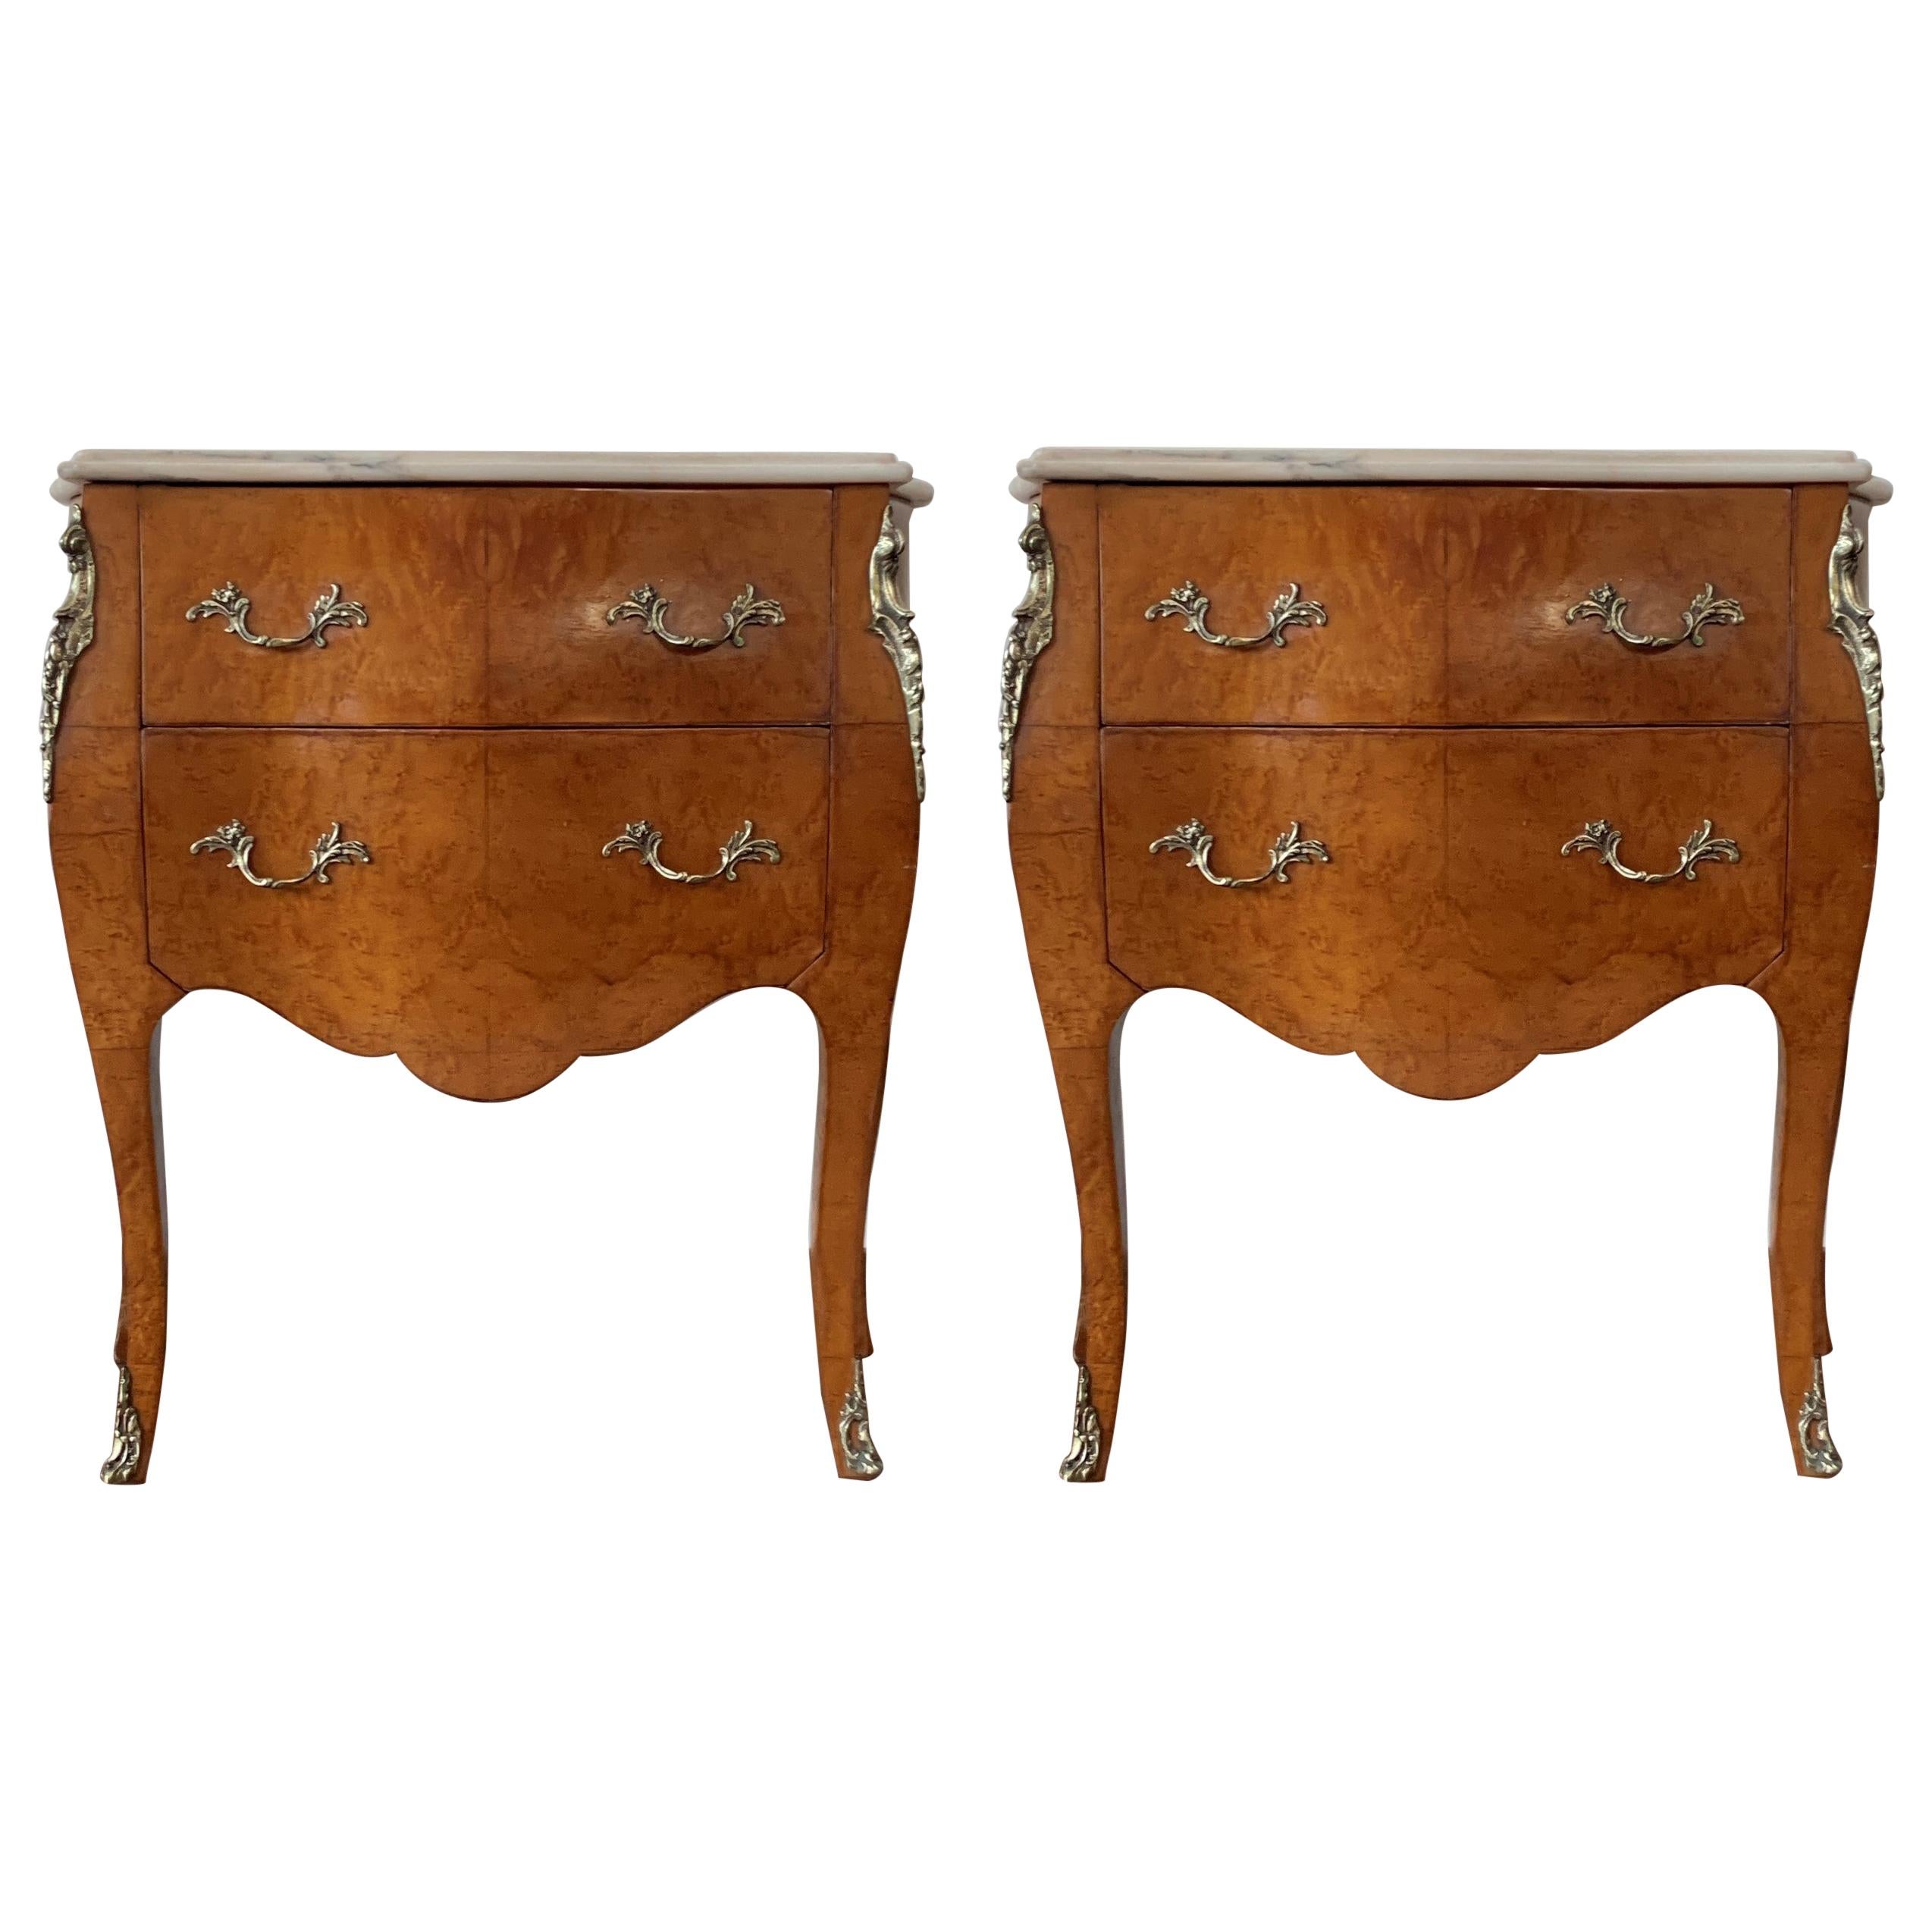 20th Century Italian Fruitwood Two Drawers Nightstands or Bedside Commodes, Pair